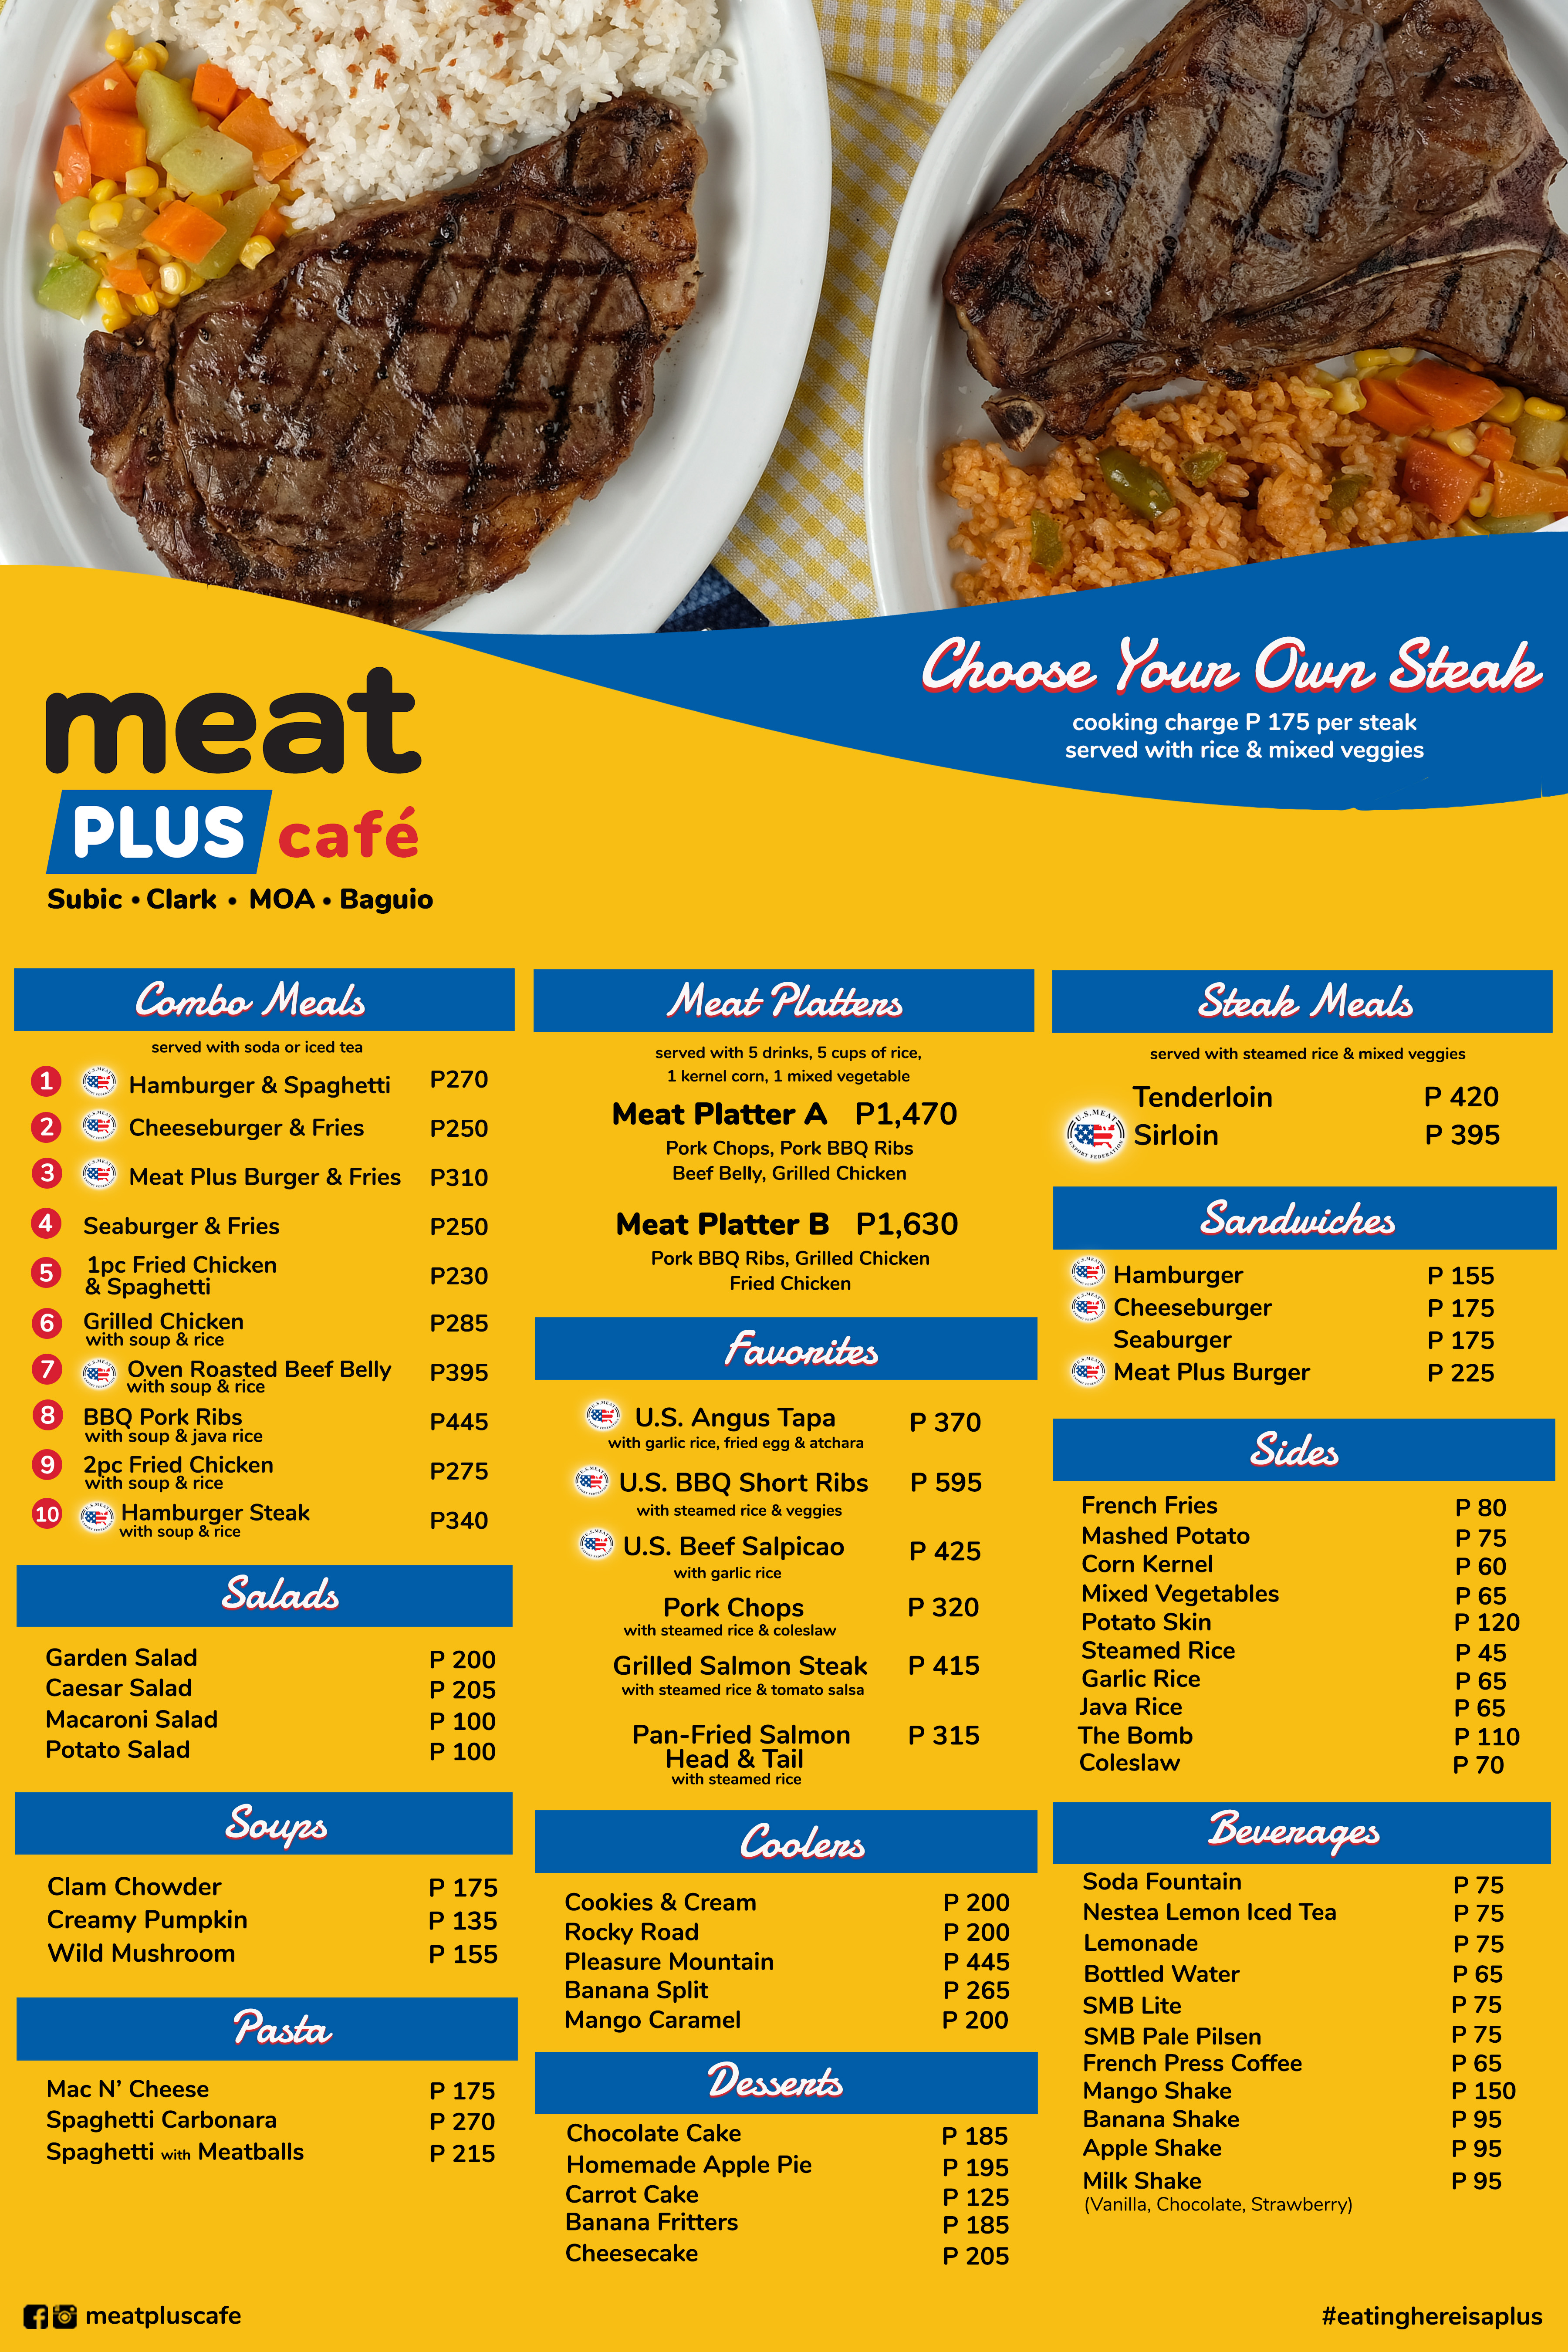 Meat Plus Cafe: Great Cuts of Meat, Plus Ultra